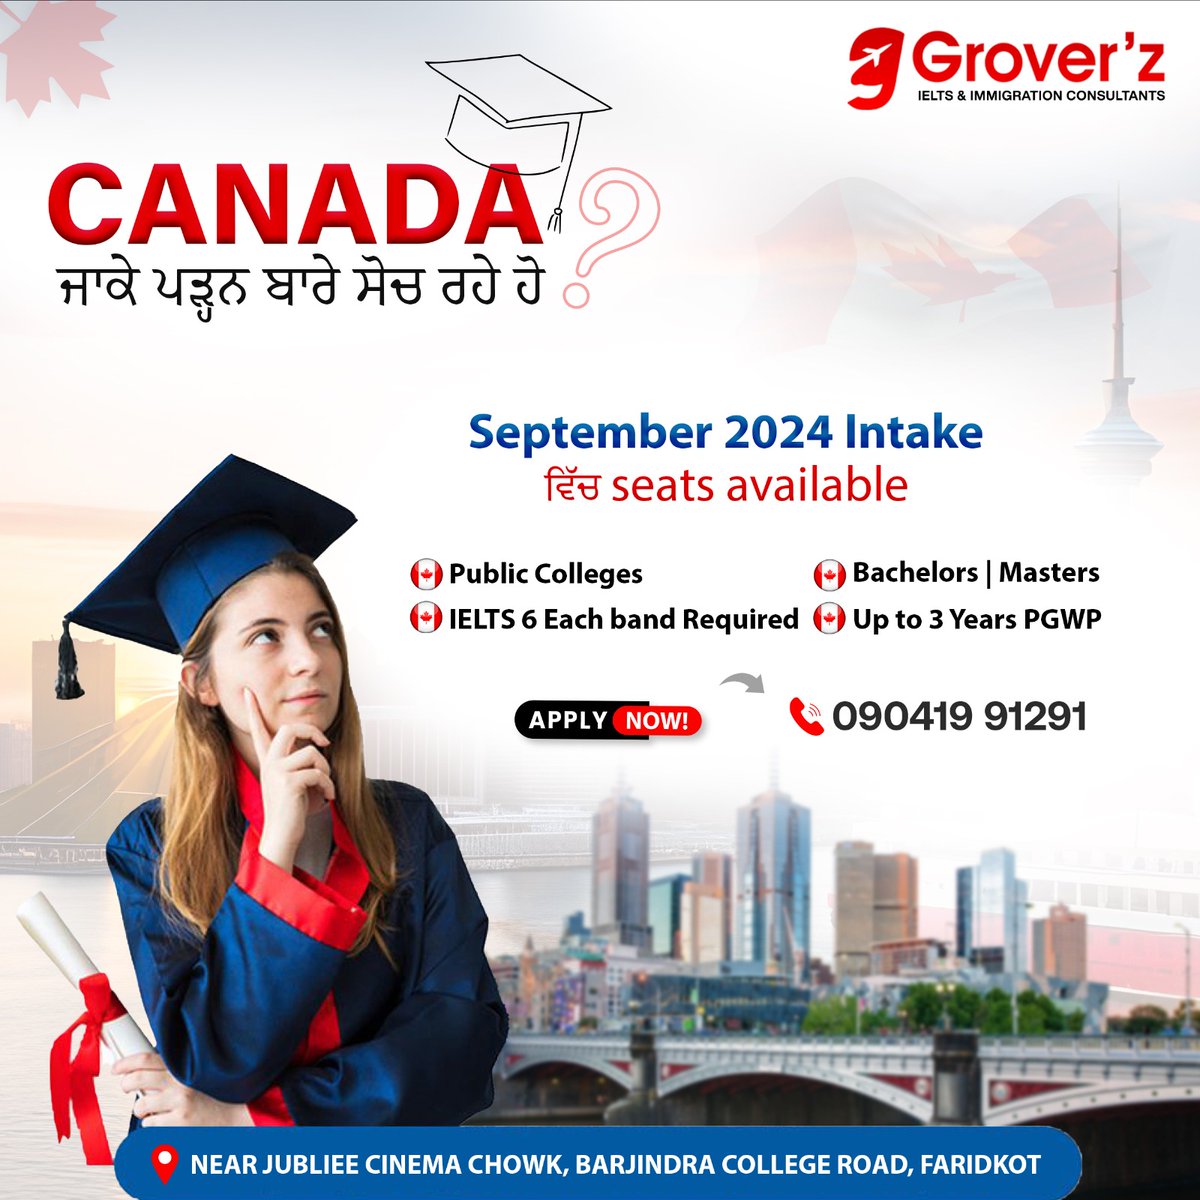 Study in Canada: Your 2024 Adventure Awaits! 🍁📚
Pursue a world-class education in a stunning country? 
Secure your spot in the 2024 intake with our expert guidance! 🤝

#GroverzIeltsImmigration #Canada #StudyVisa #2024intake #canadastudy #studyincanada 
#CanadaStudy #2024Intake